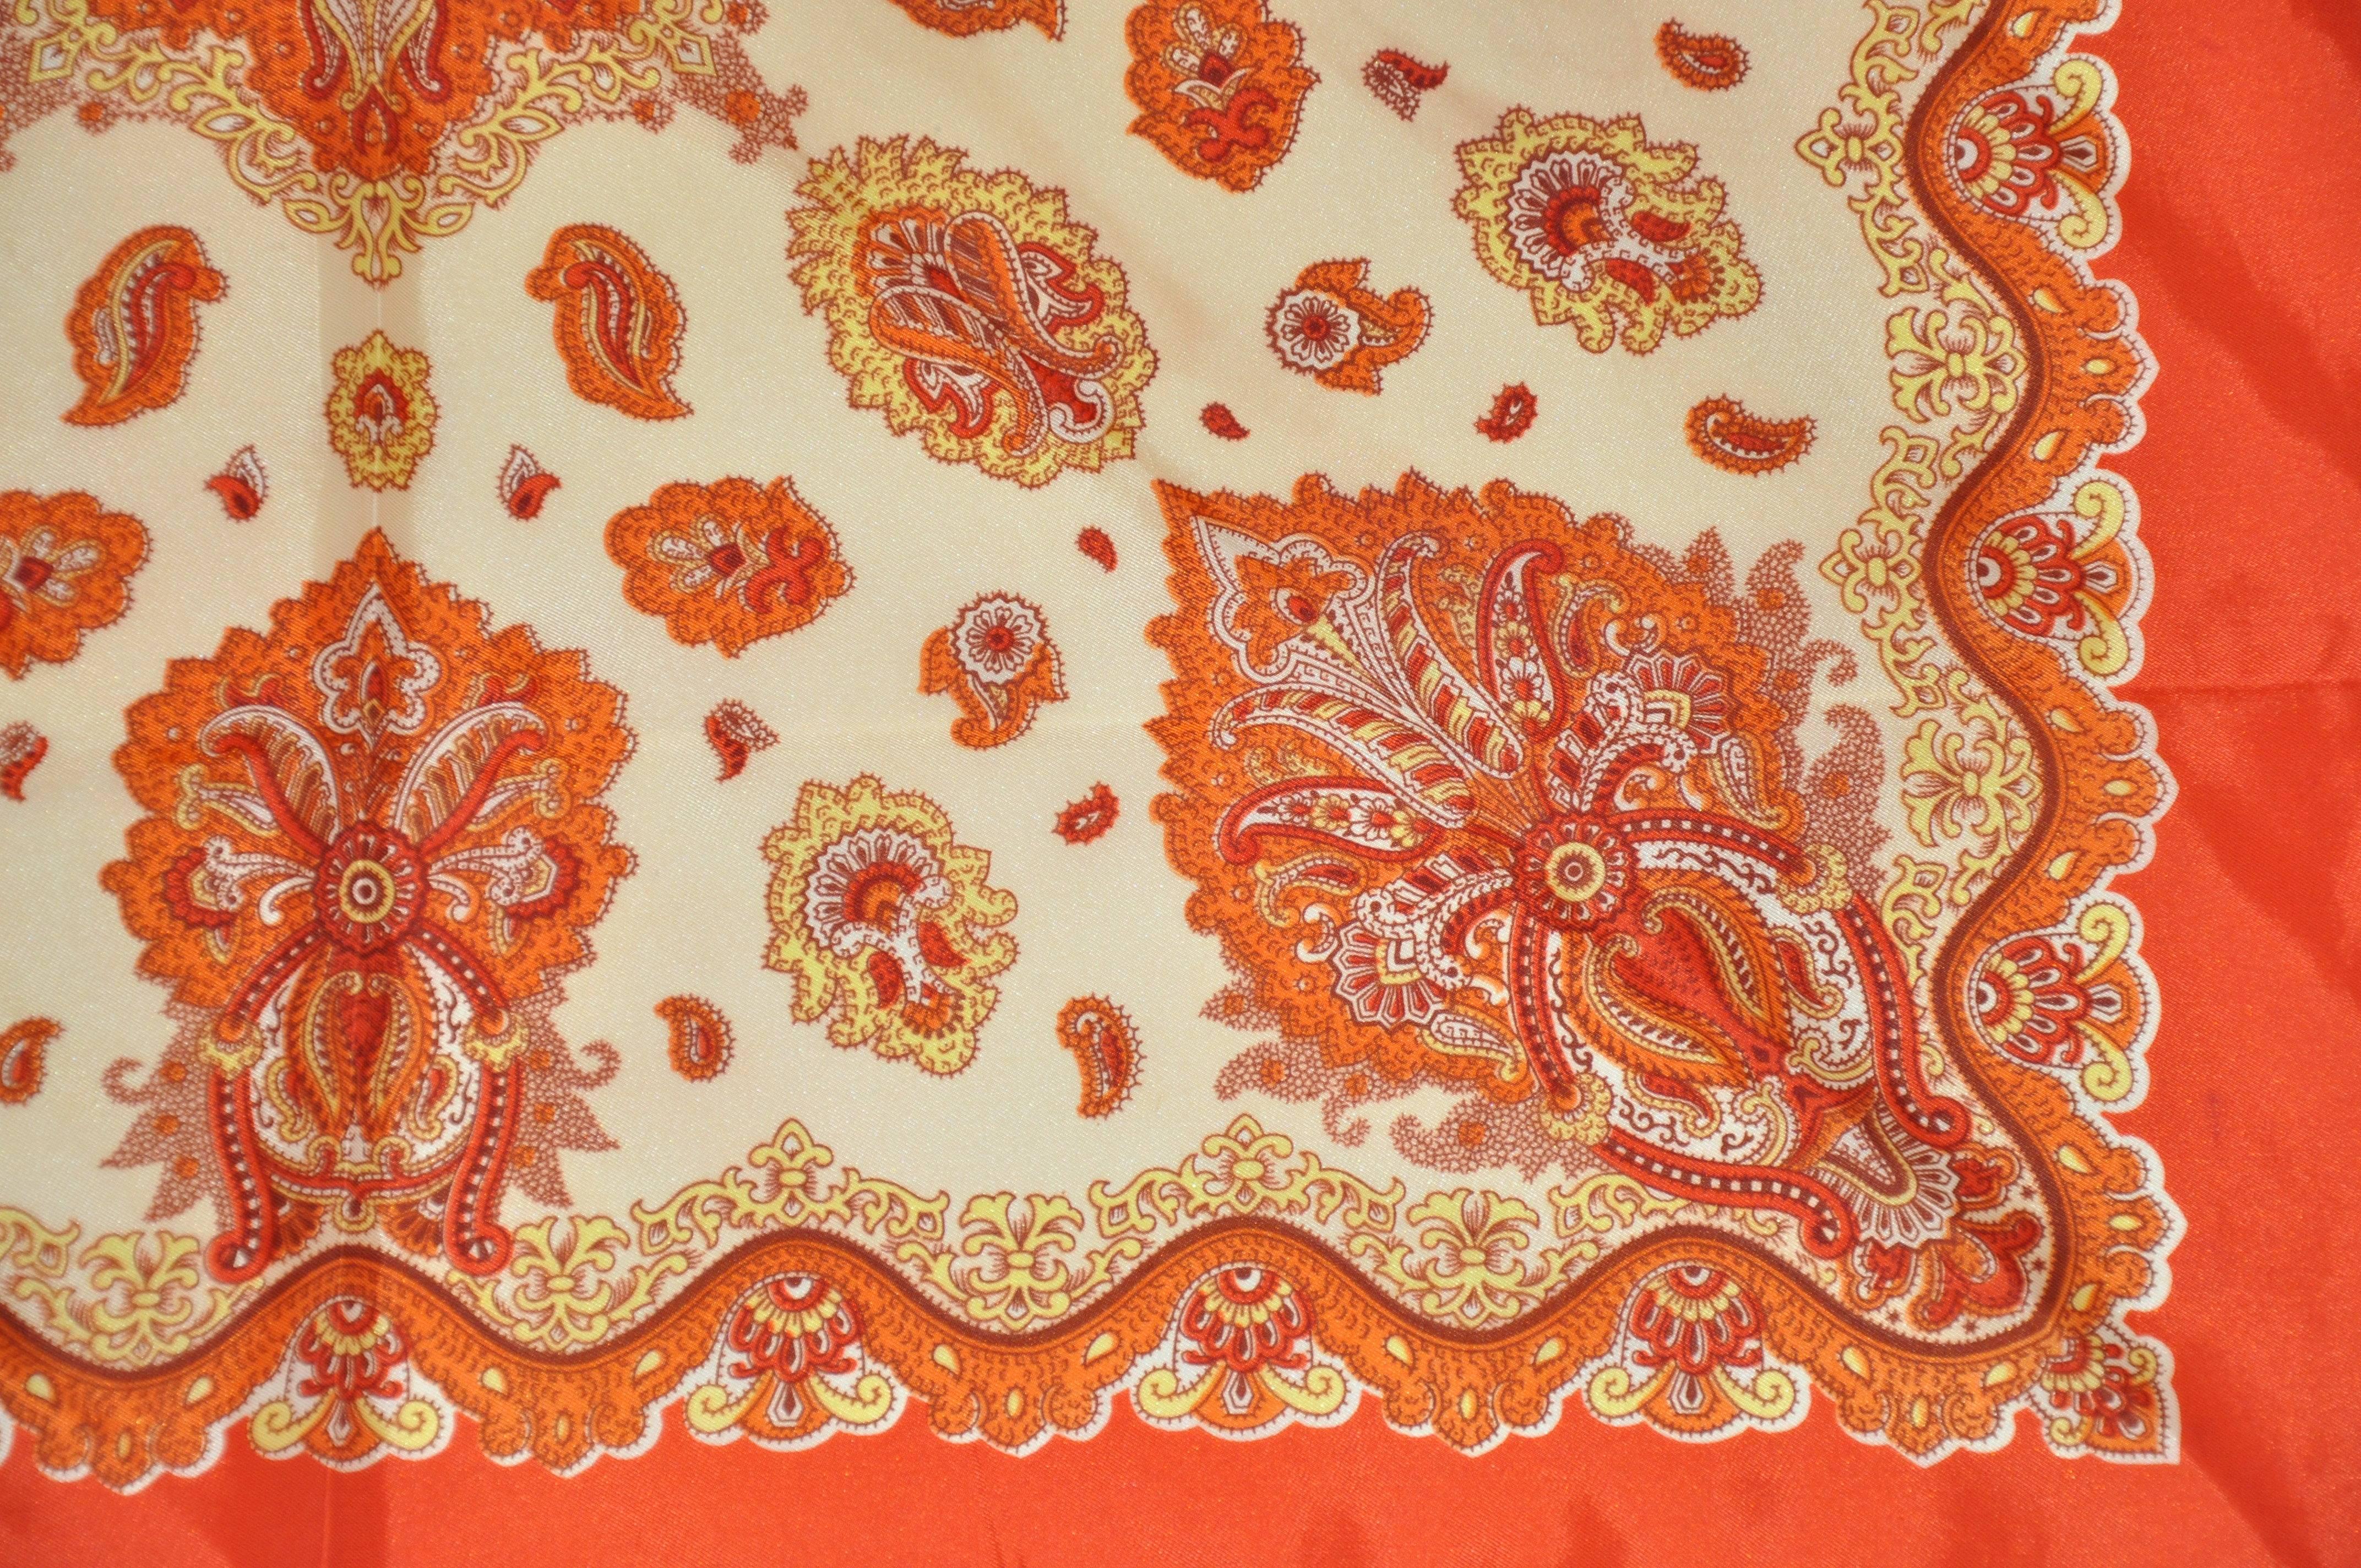       This wonderfully vivid scarf with multi shades of tangerines and orange hue set in multi-palseys measures 26 inches by 26 inches and finished with hand-rolled edges. Made of acetate in Japan.